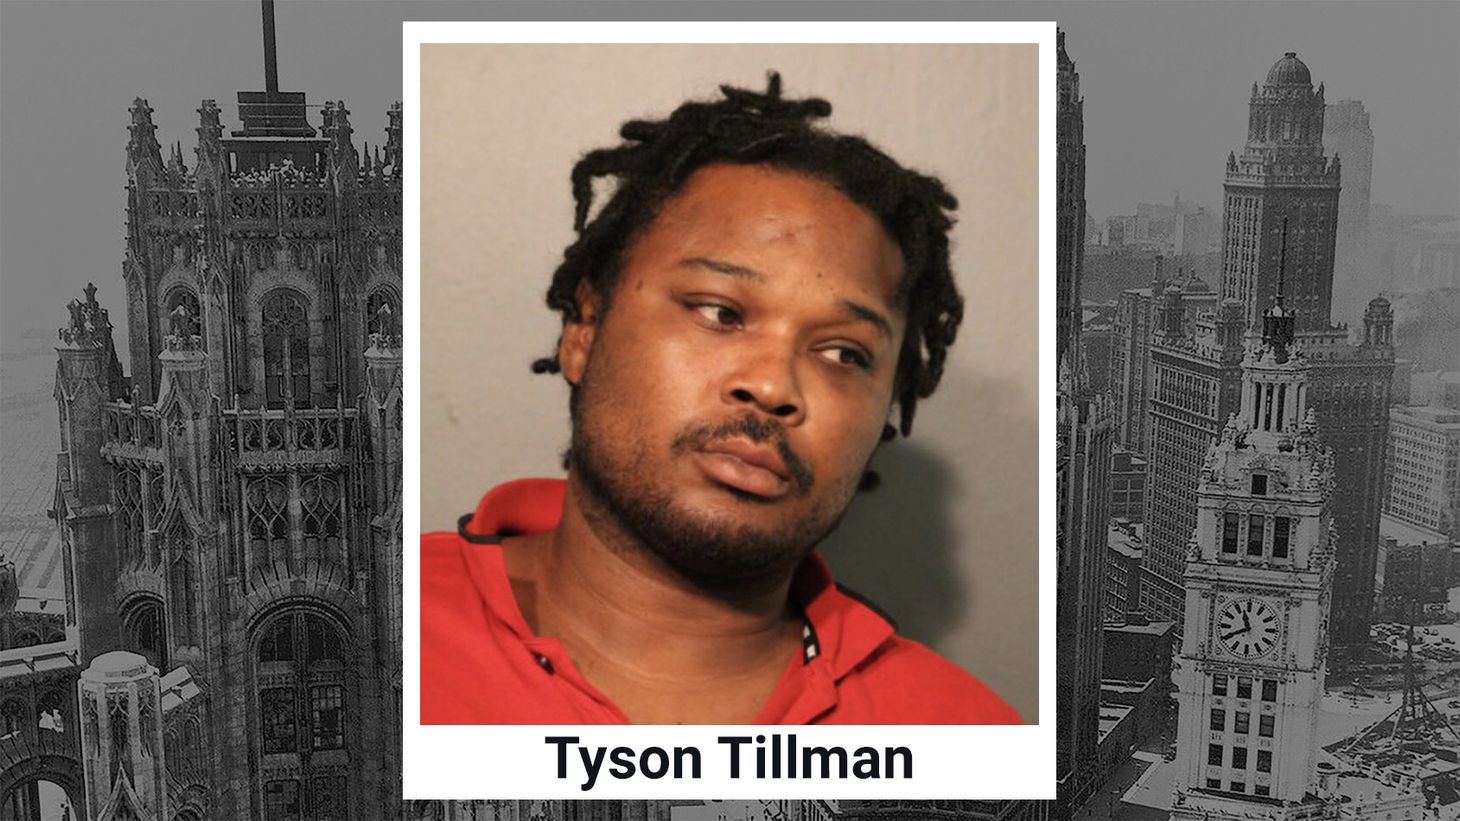 Man charged with murder of woman in Uptown